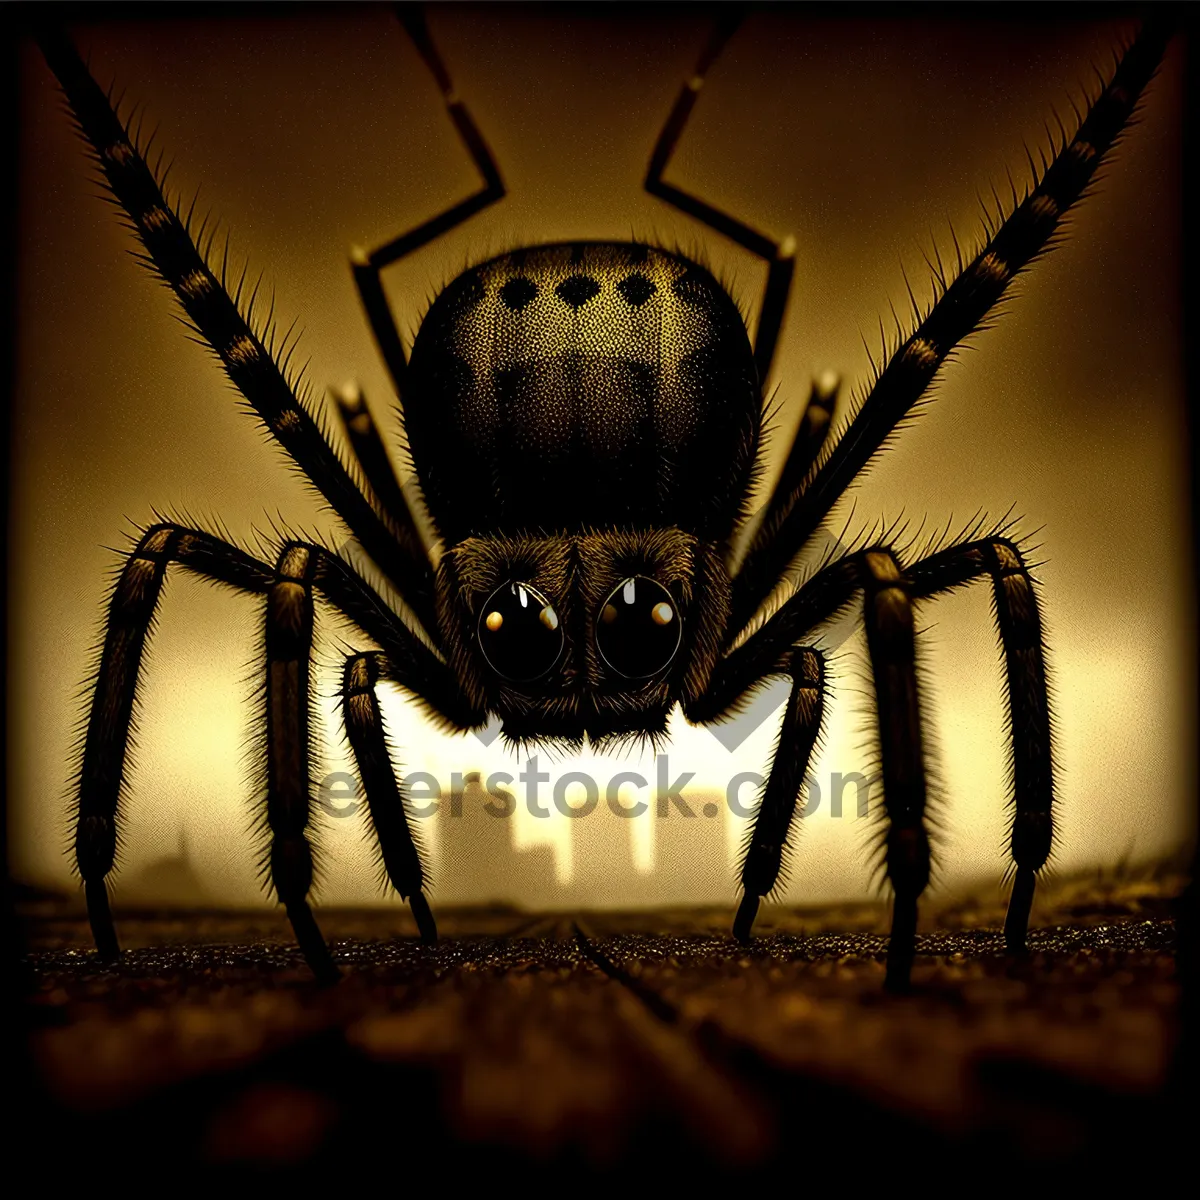 Picture of Barn Spider - Black and Gold Arachnid Beauty